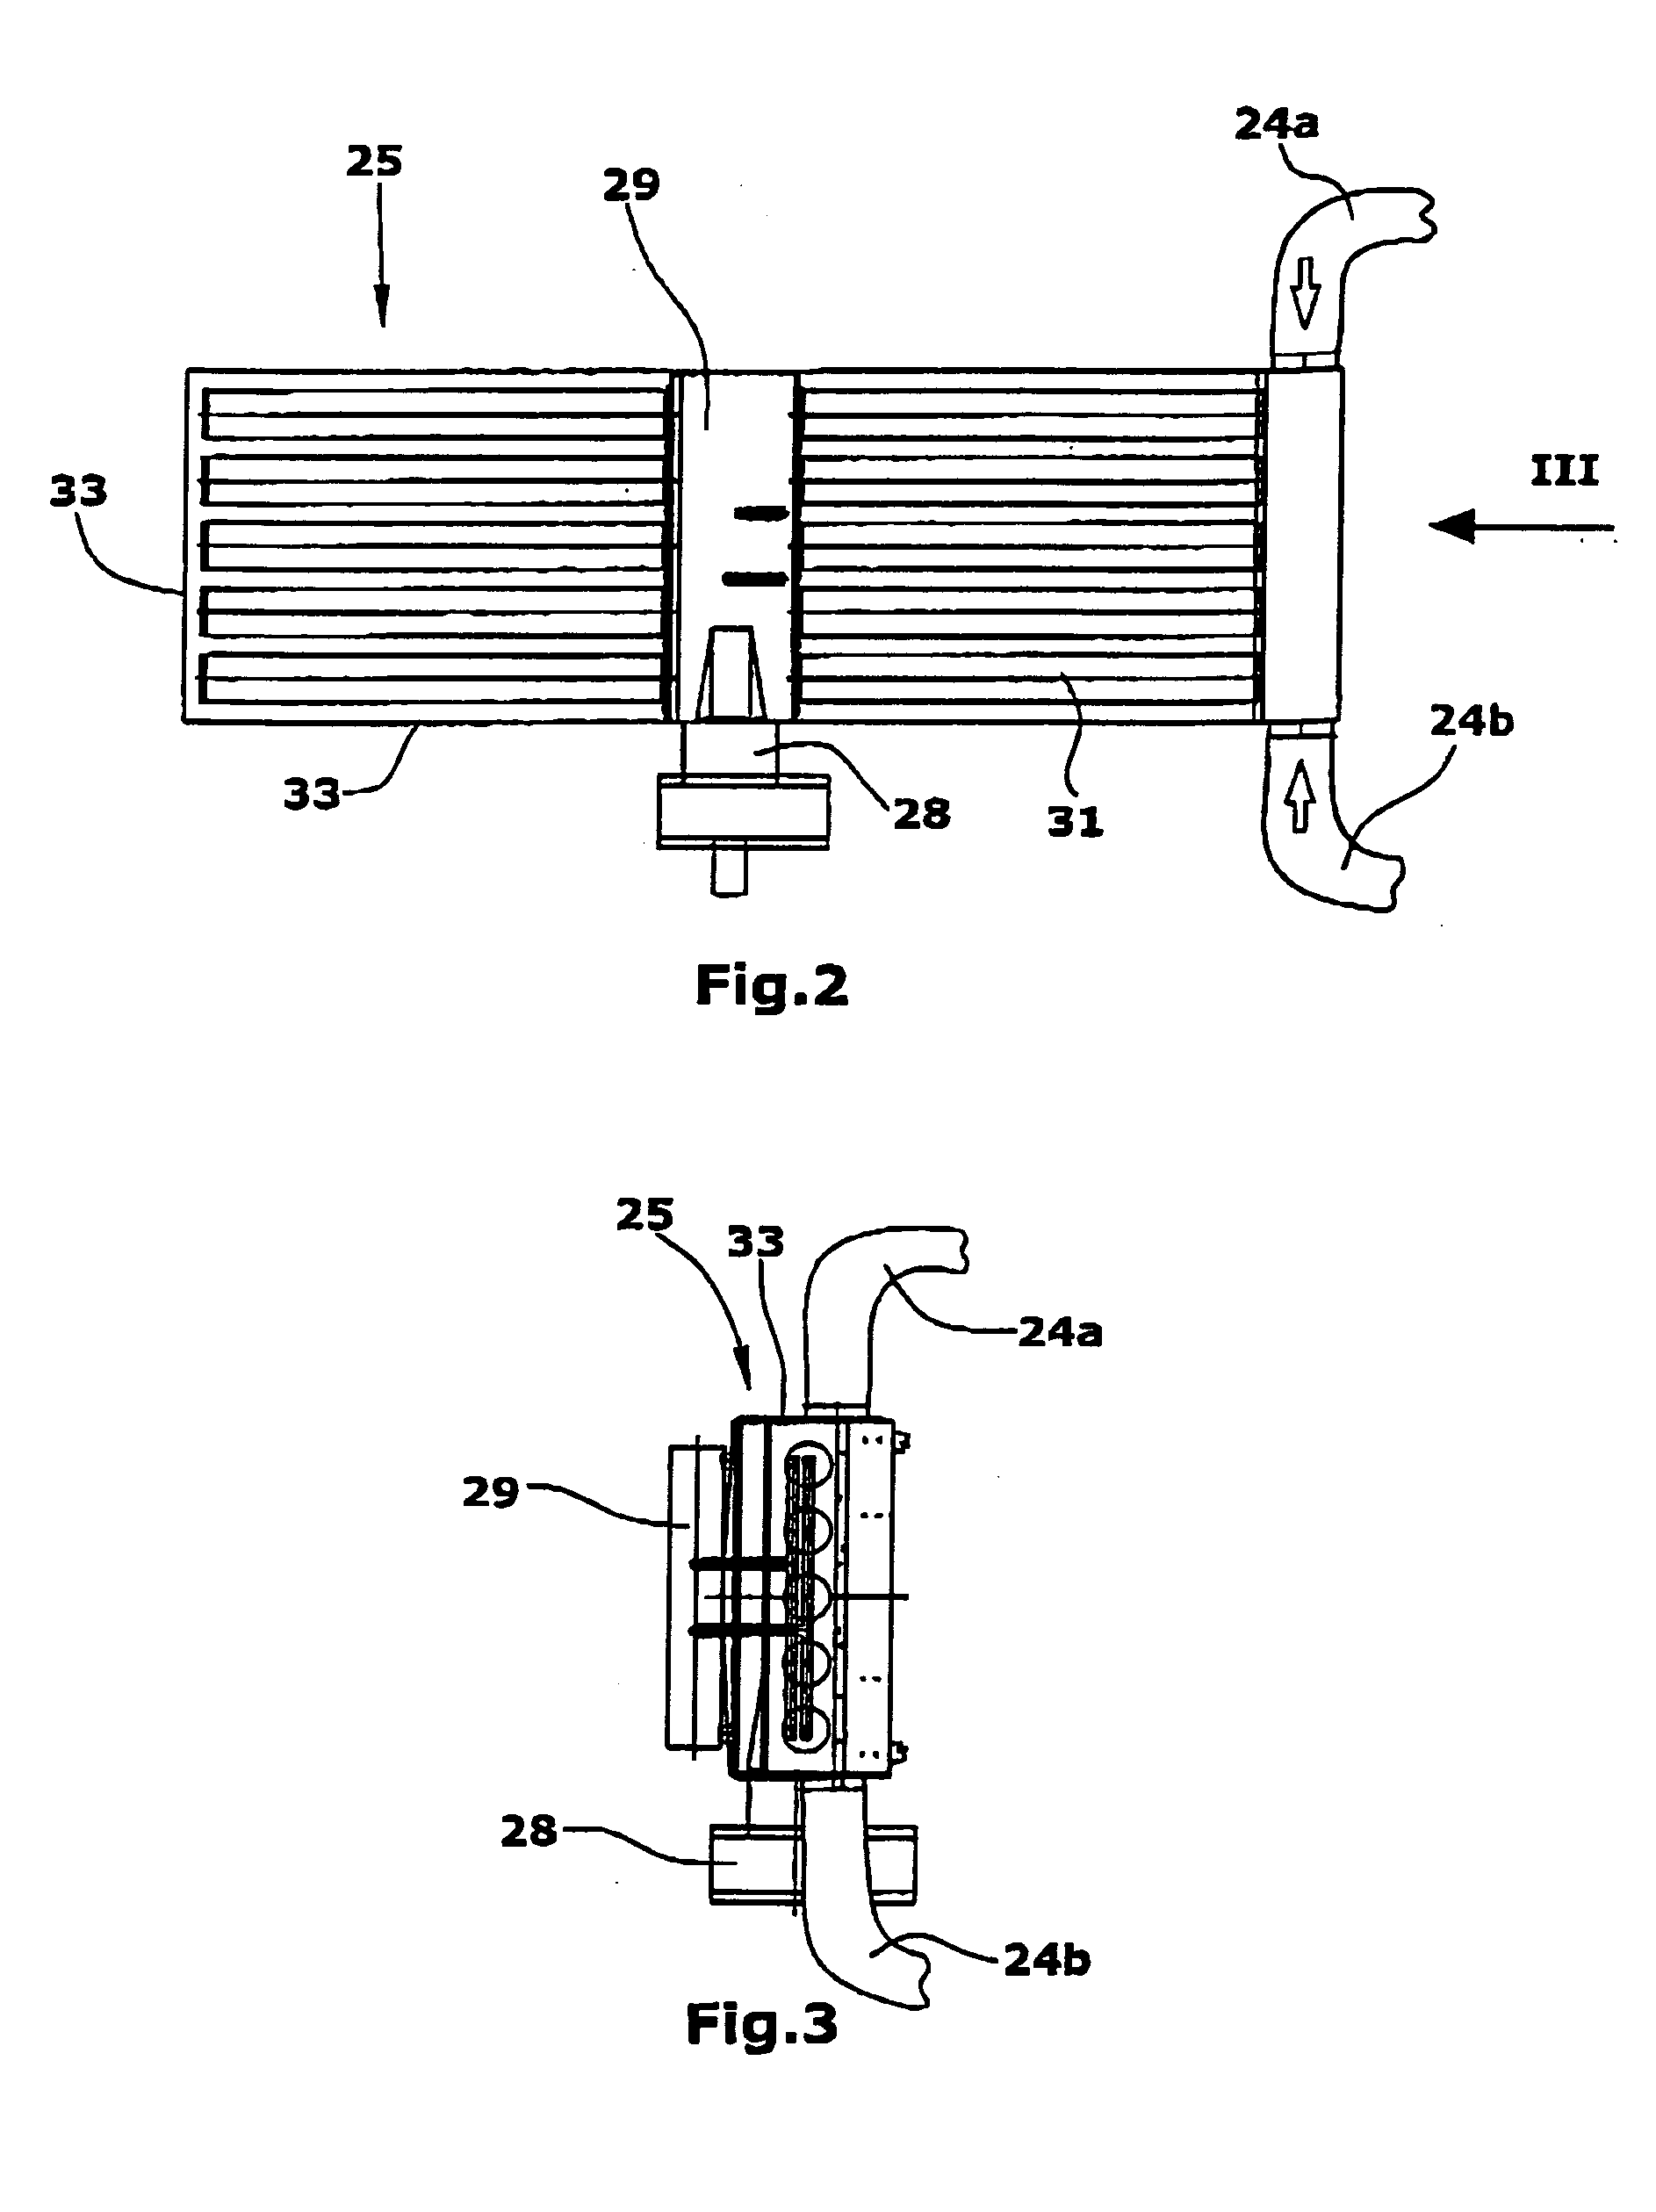 Milling machine as well as method for working ground surfaces